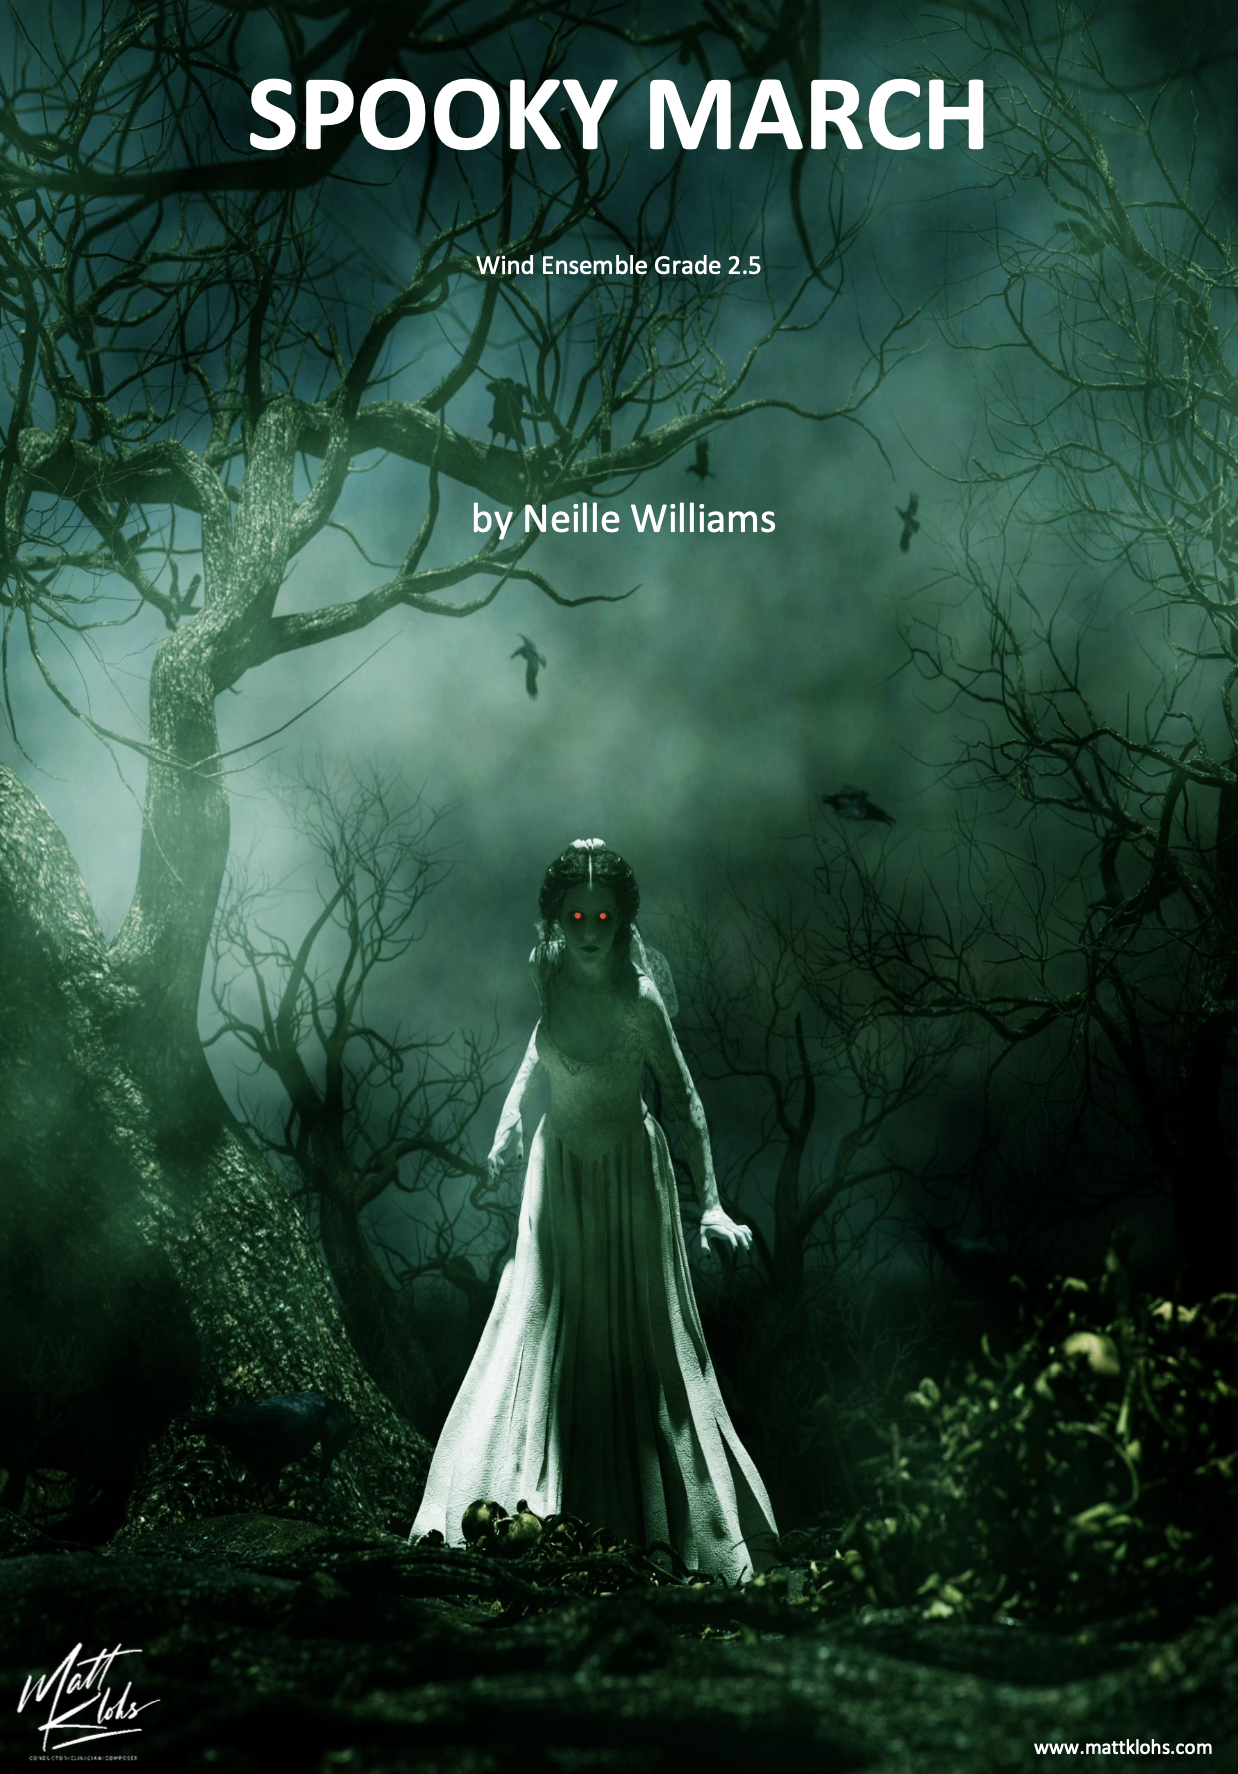 Spooky March by Nellie Williams